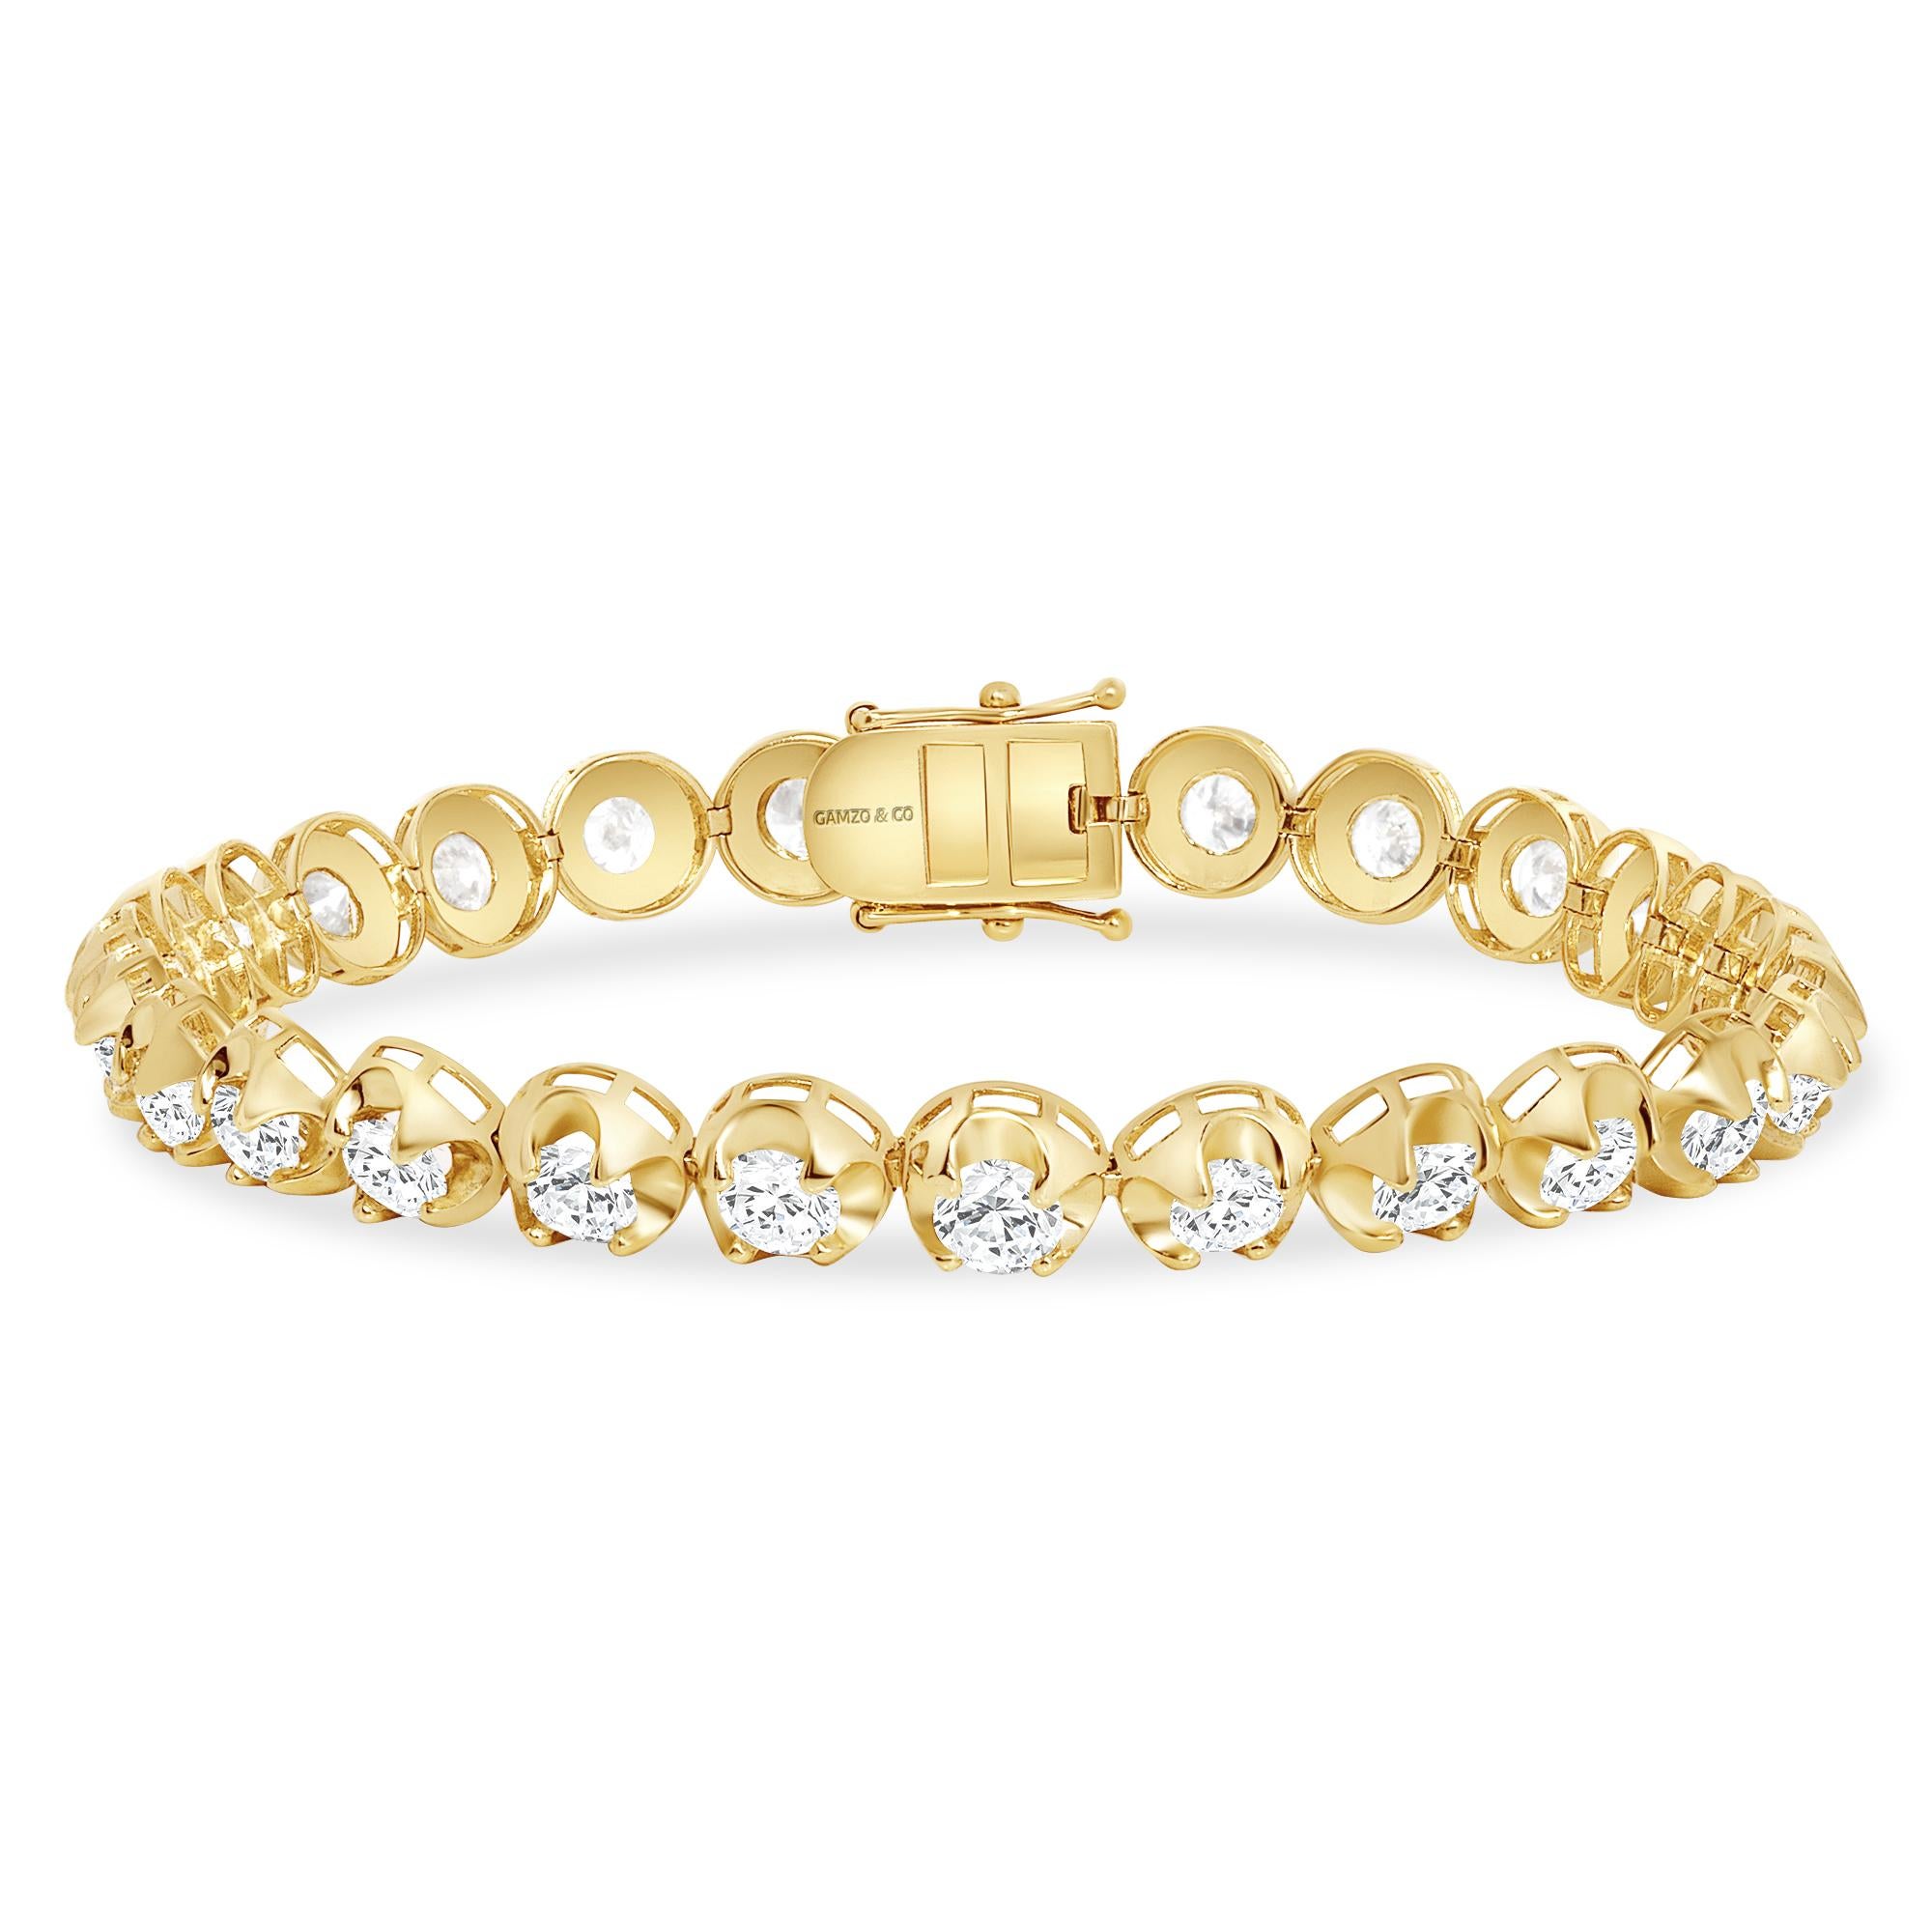 These beautiful round diamonds dance around your wrist as they absorb light and attention.
Metal: 14k Gold
Diamond Cut: Round
Diamond Total Carats: 7ct
Diamond Clarity: VS
Diamond Color: F
Color: Yellow Gold
Bracelet Length: 5.5 Inches 
Included